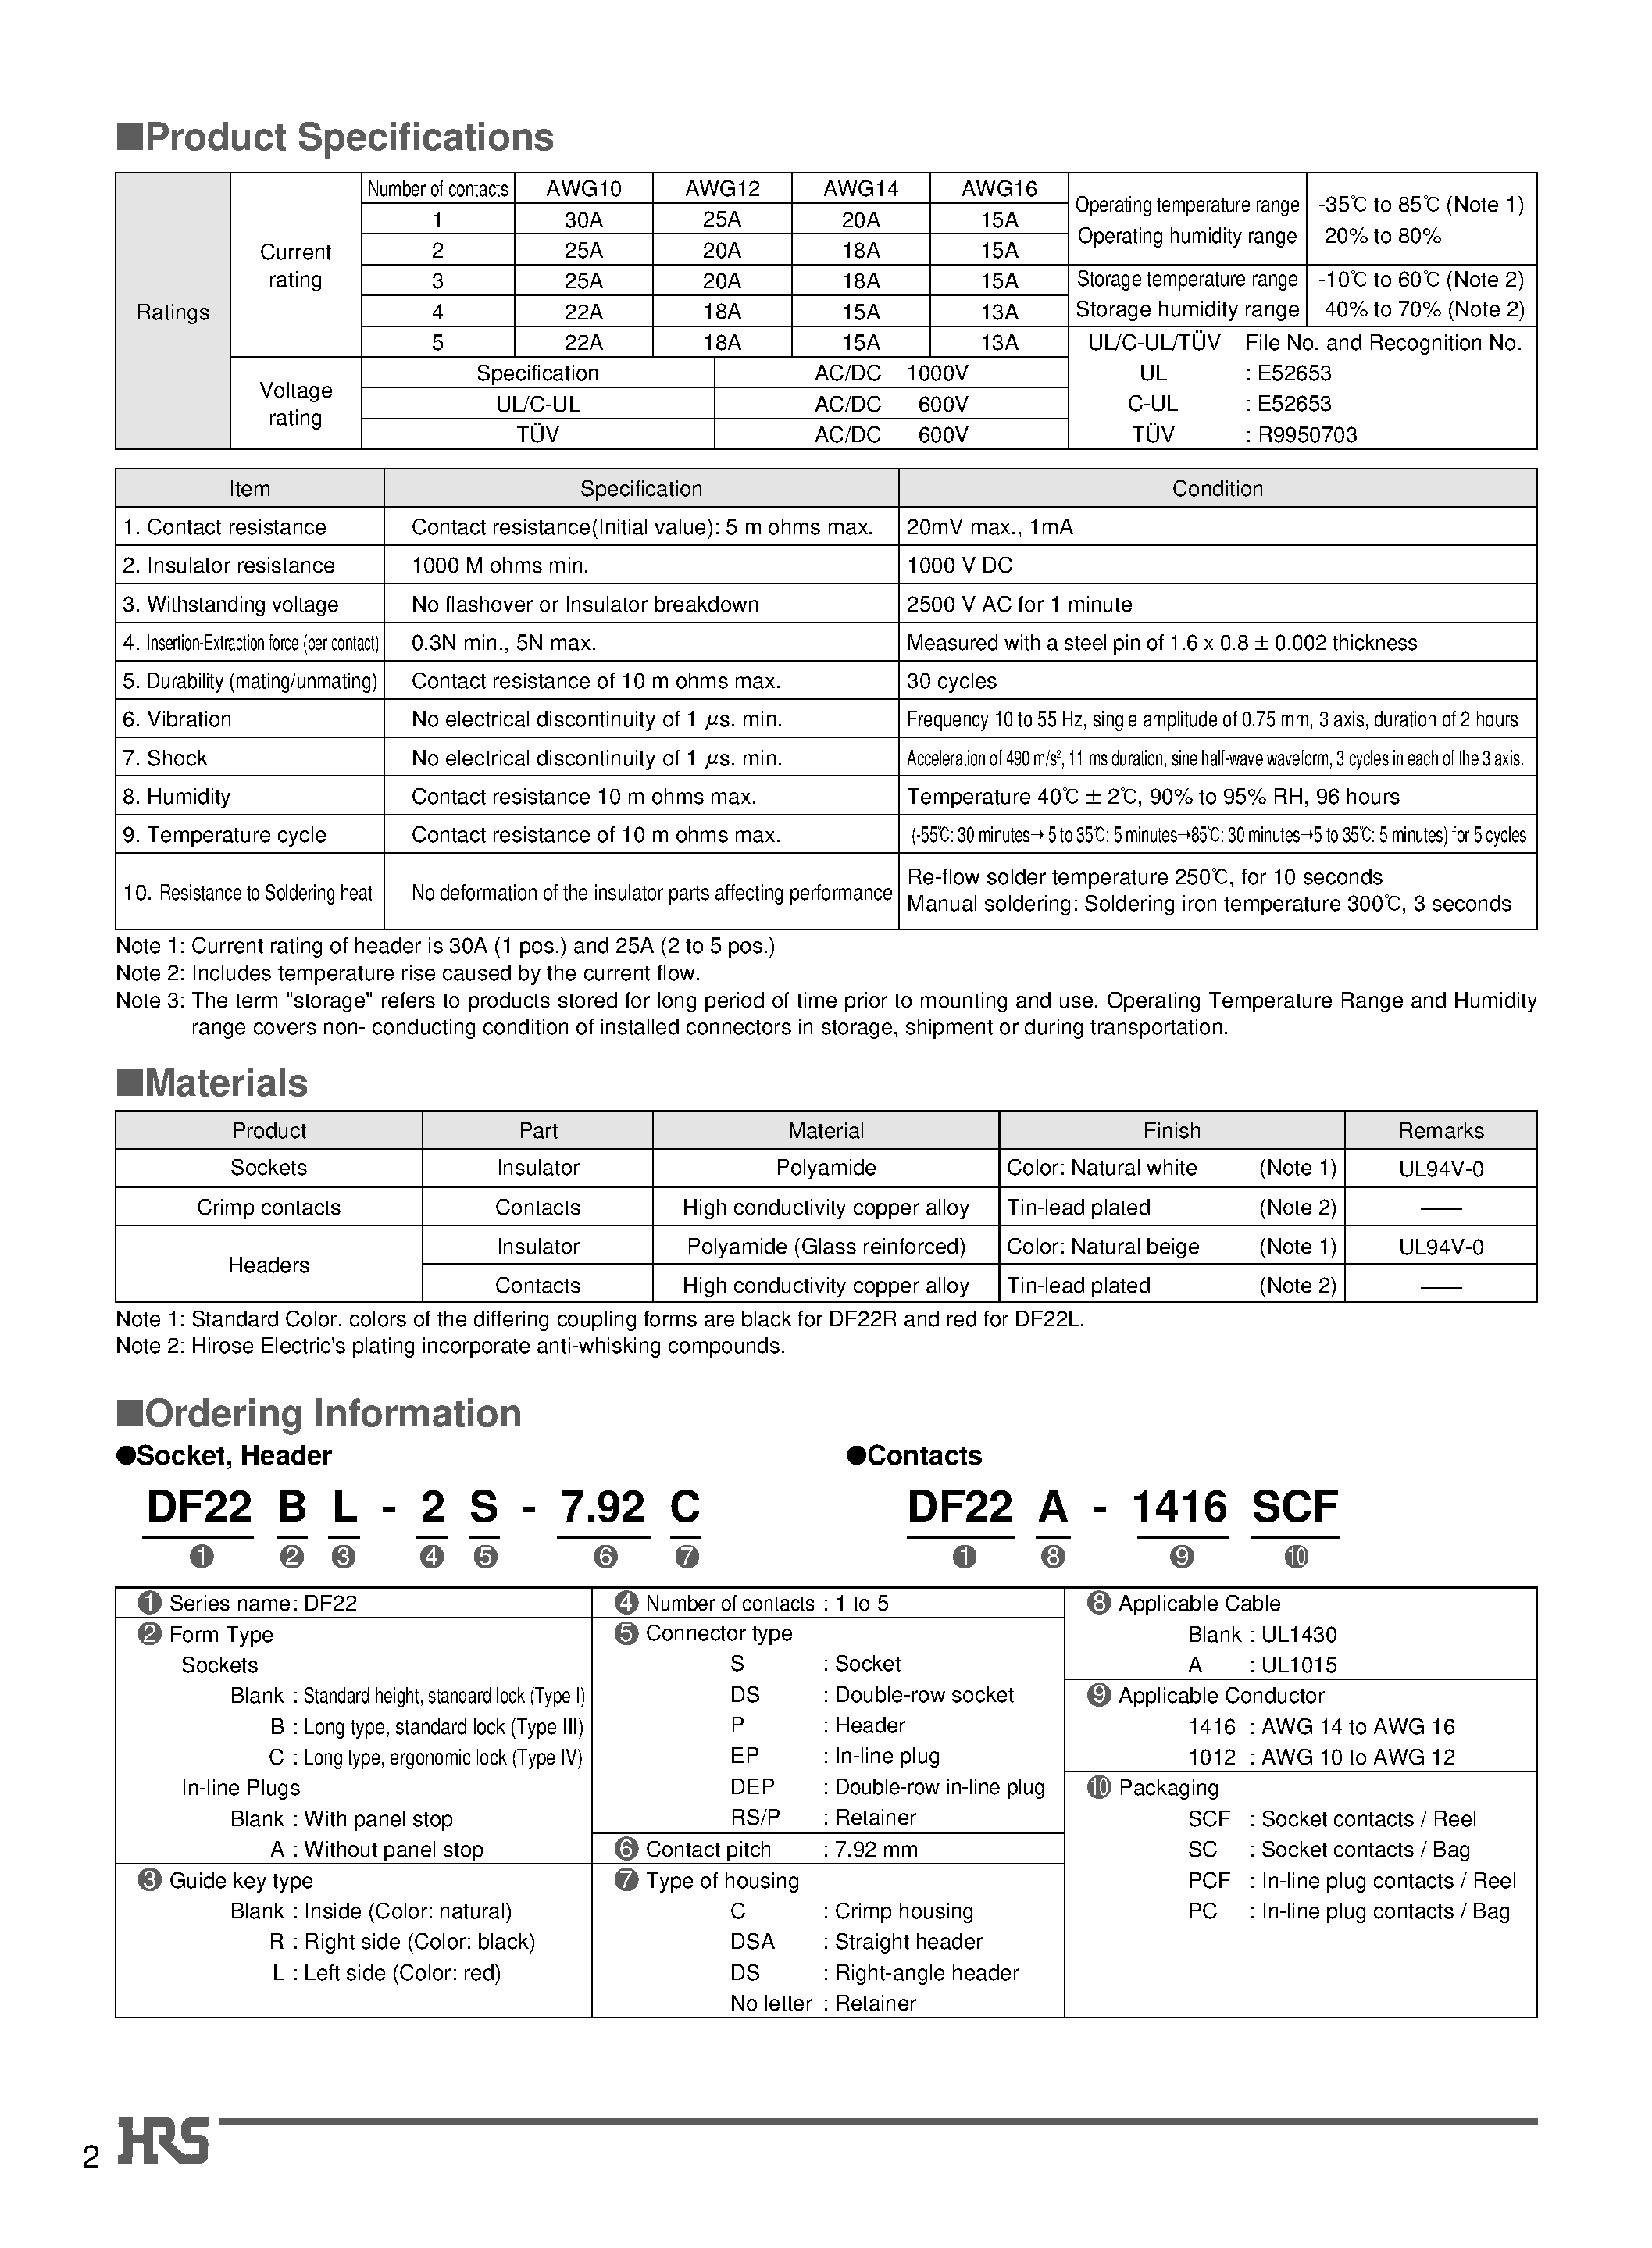 Datasheet DF22-2DEP-7.92C - 7.92 mm Contact Pitch/ High-Current Connectors for Internal Power Supplies (UL/ C-UL and TUV Listed) page 2